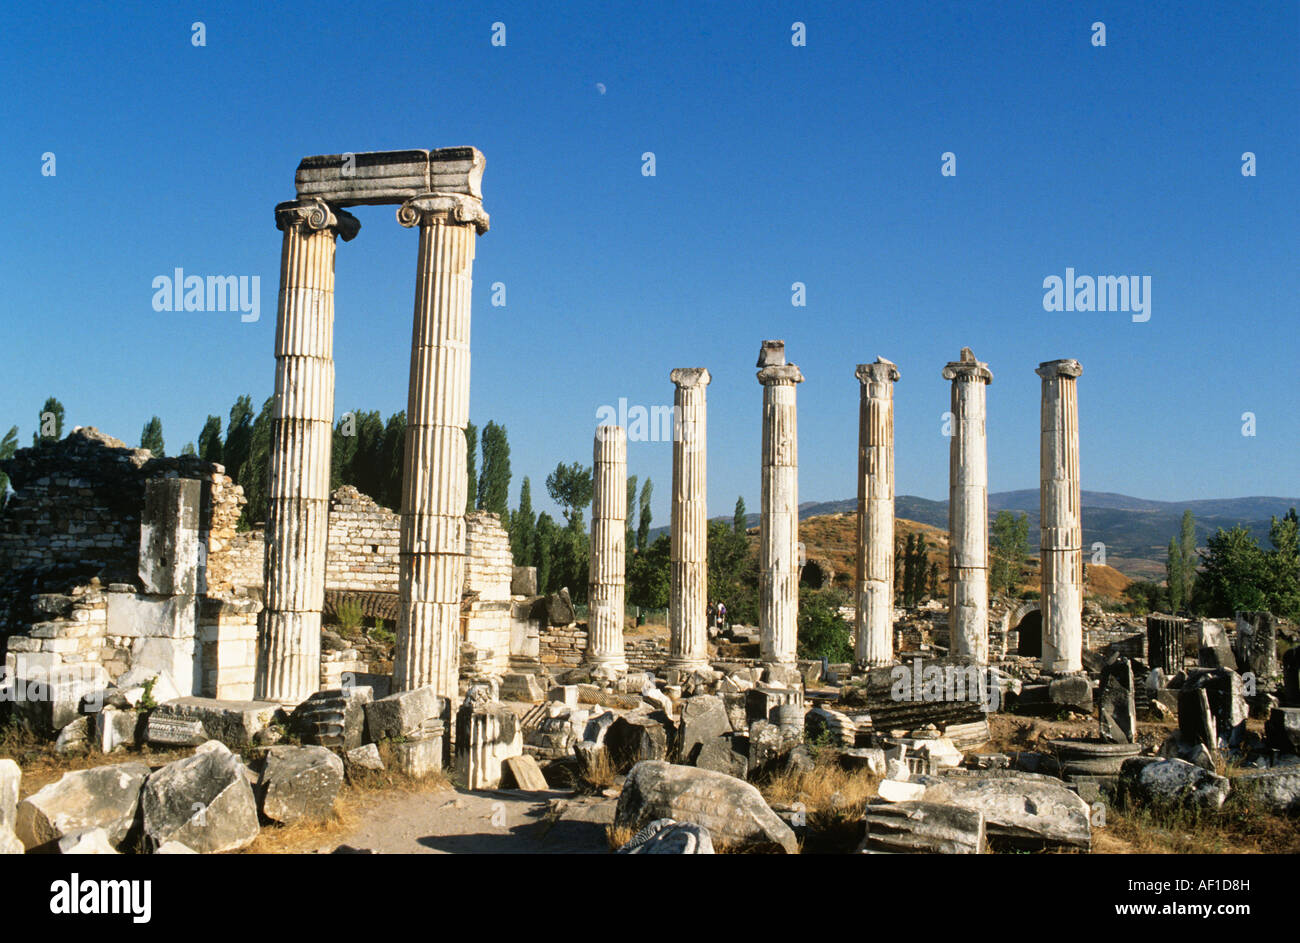 Turkey Hierapolis, Pammukale,Remains of theTemple of AphroditeFounded in the 5C B.C.the originalTemple of Aphrodite had40 column Stock Photo